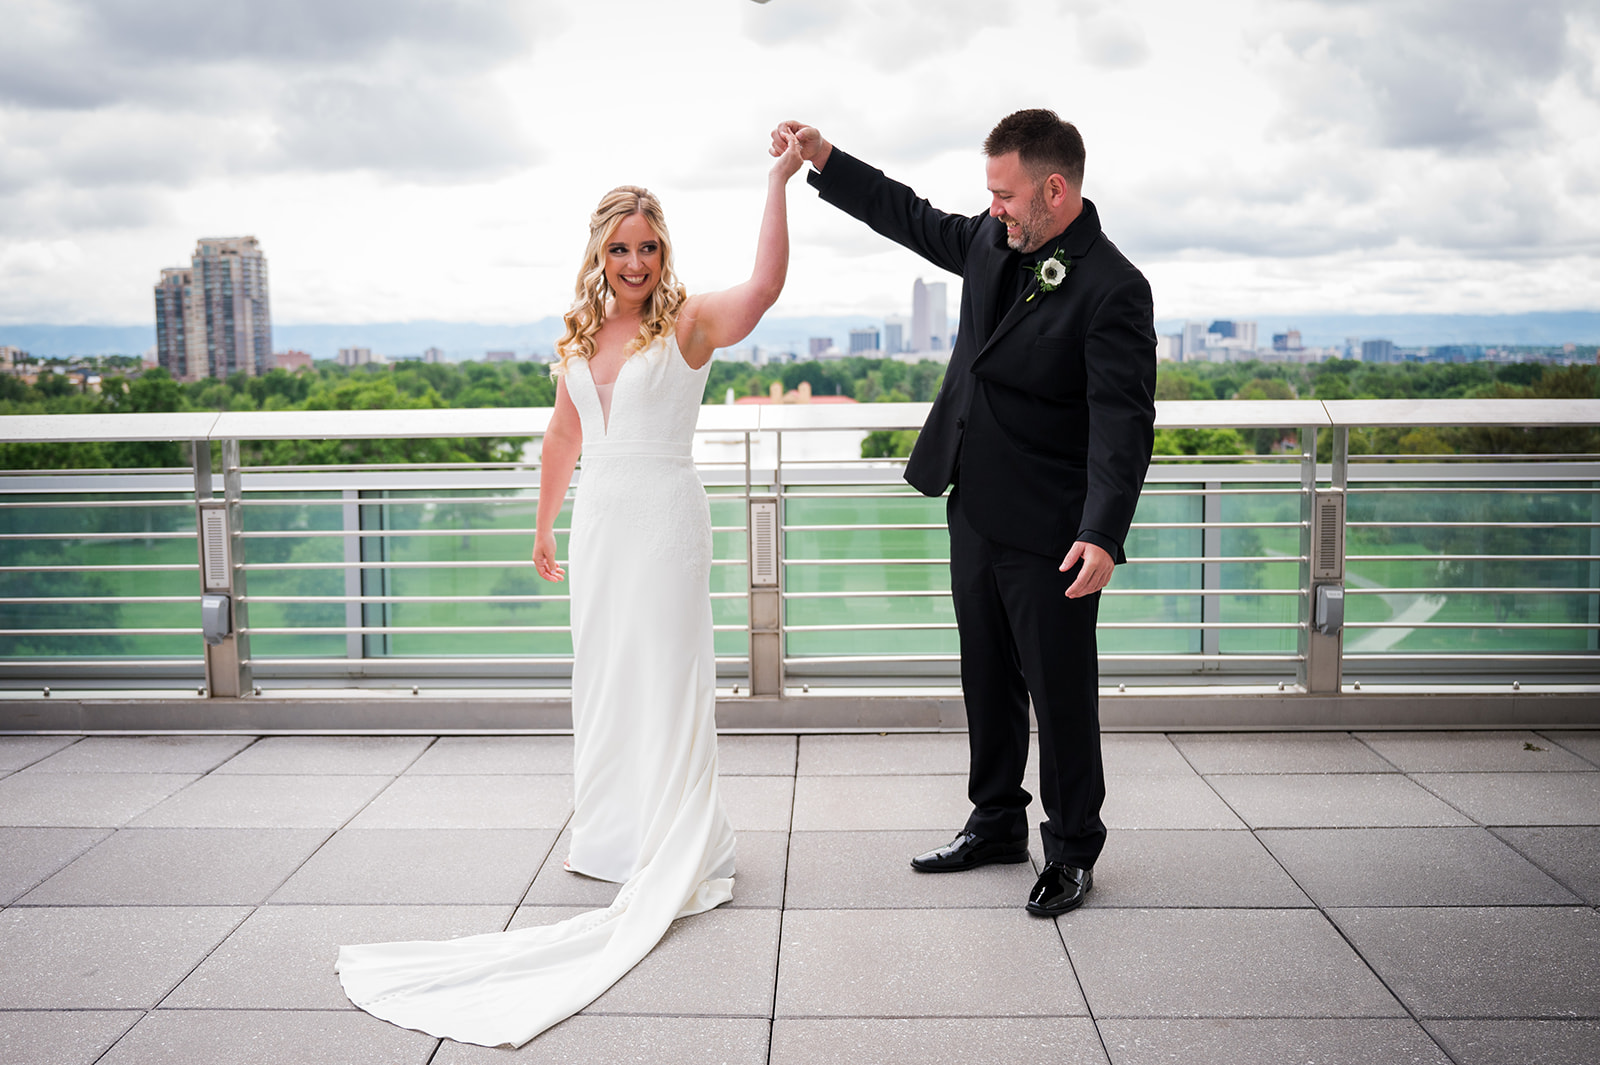 Groom spins bride around on a rooftop with Denver city skyline in the background.